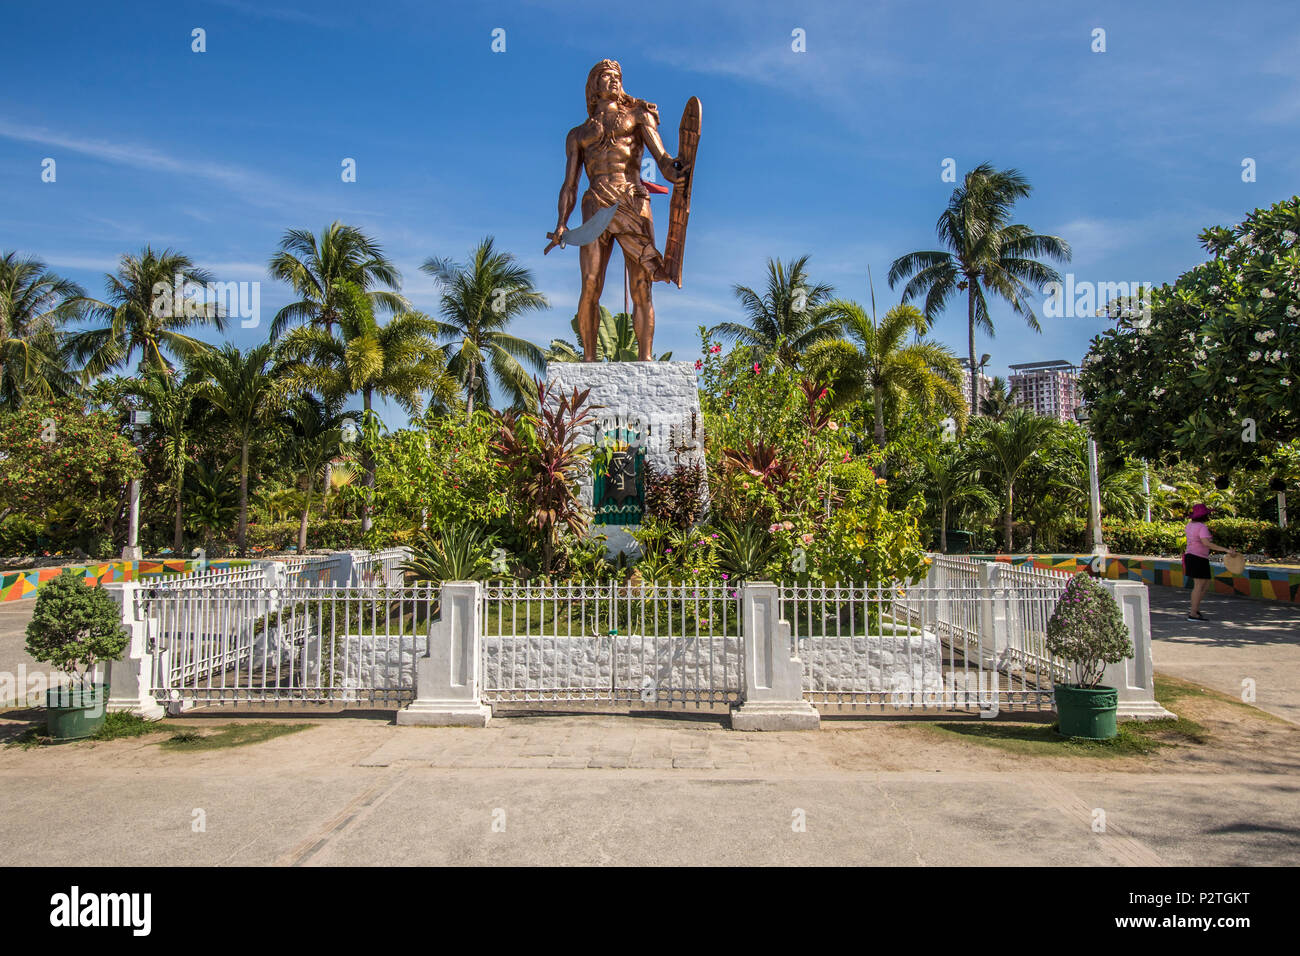 Statue of Lapu lapu Chief of Mactan before colonisation by Spain on Island Mactan Philippines. Stock Photo